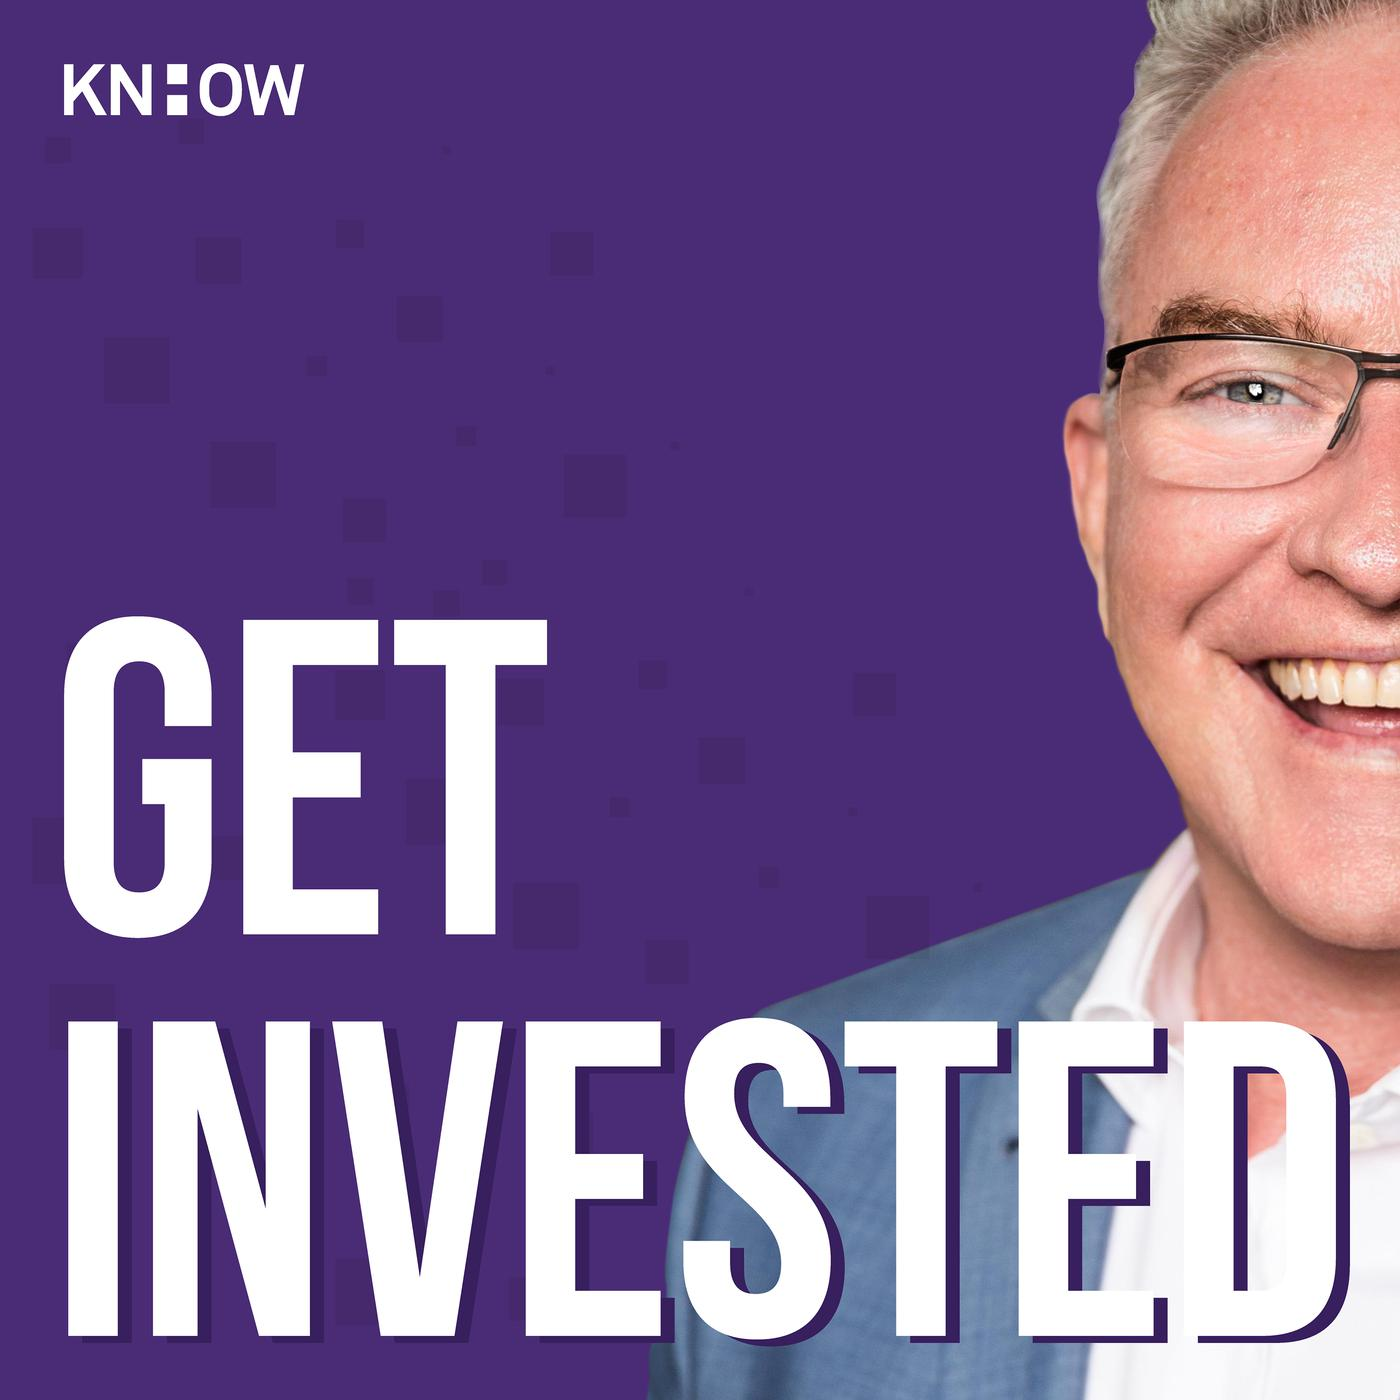 Get Invested: Part 1 - Michael Johnston on asset investment